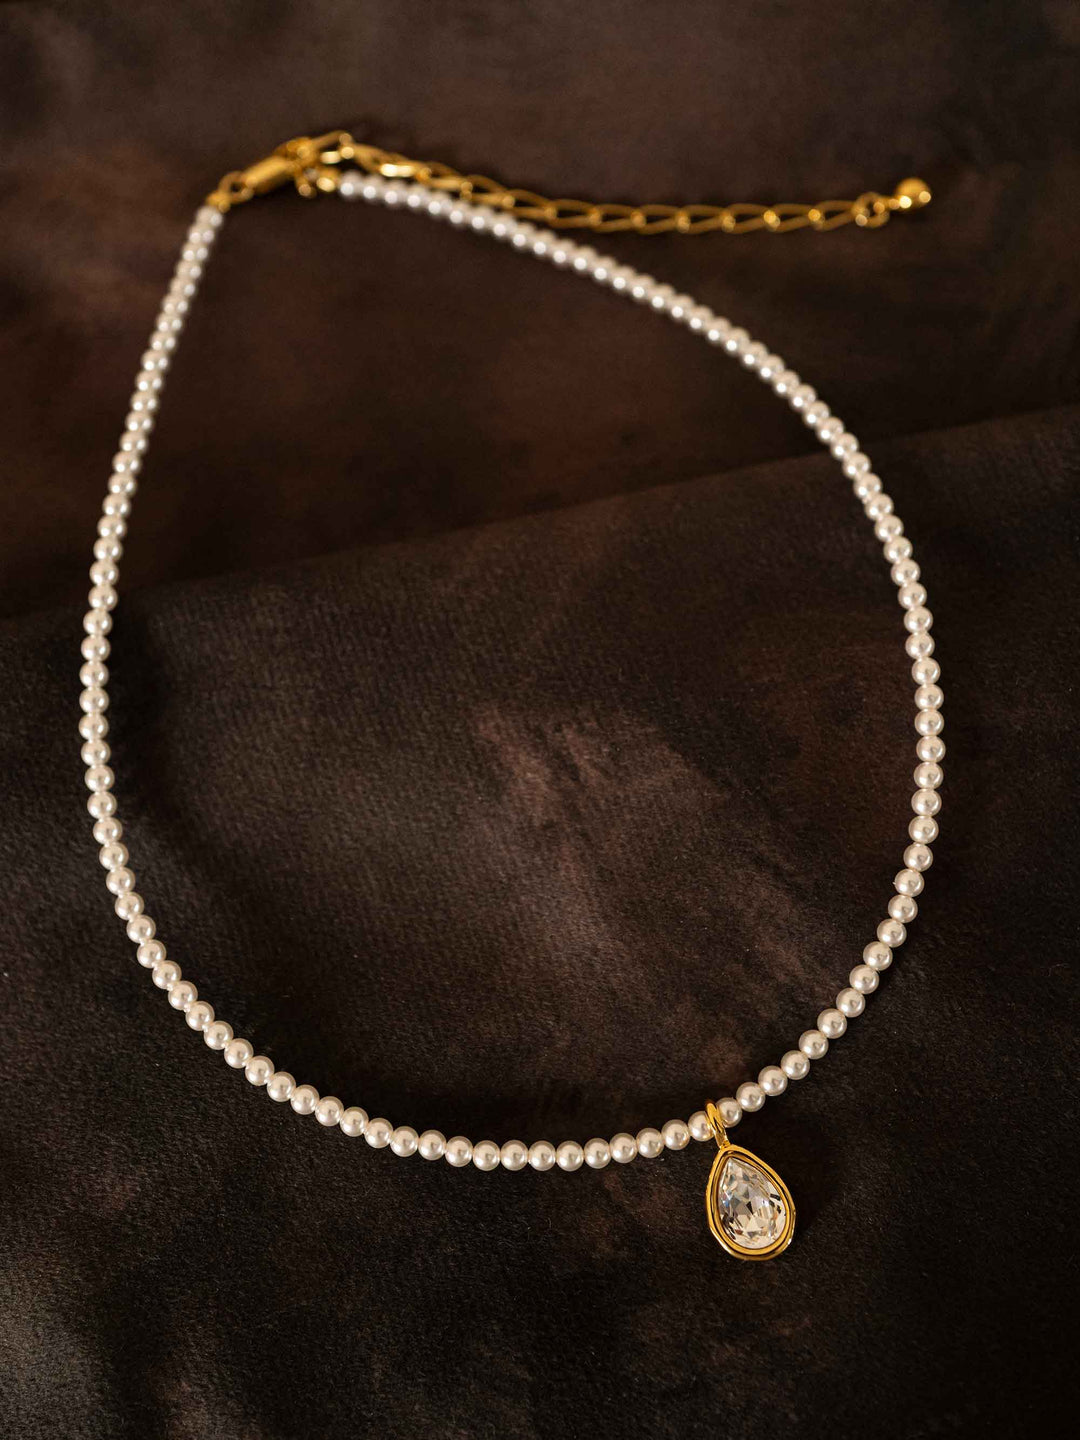 Water drop pendant pearl necklace